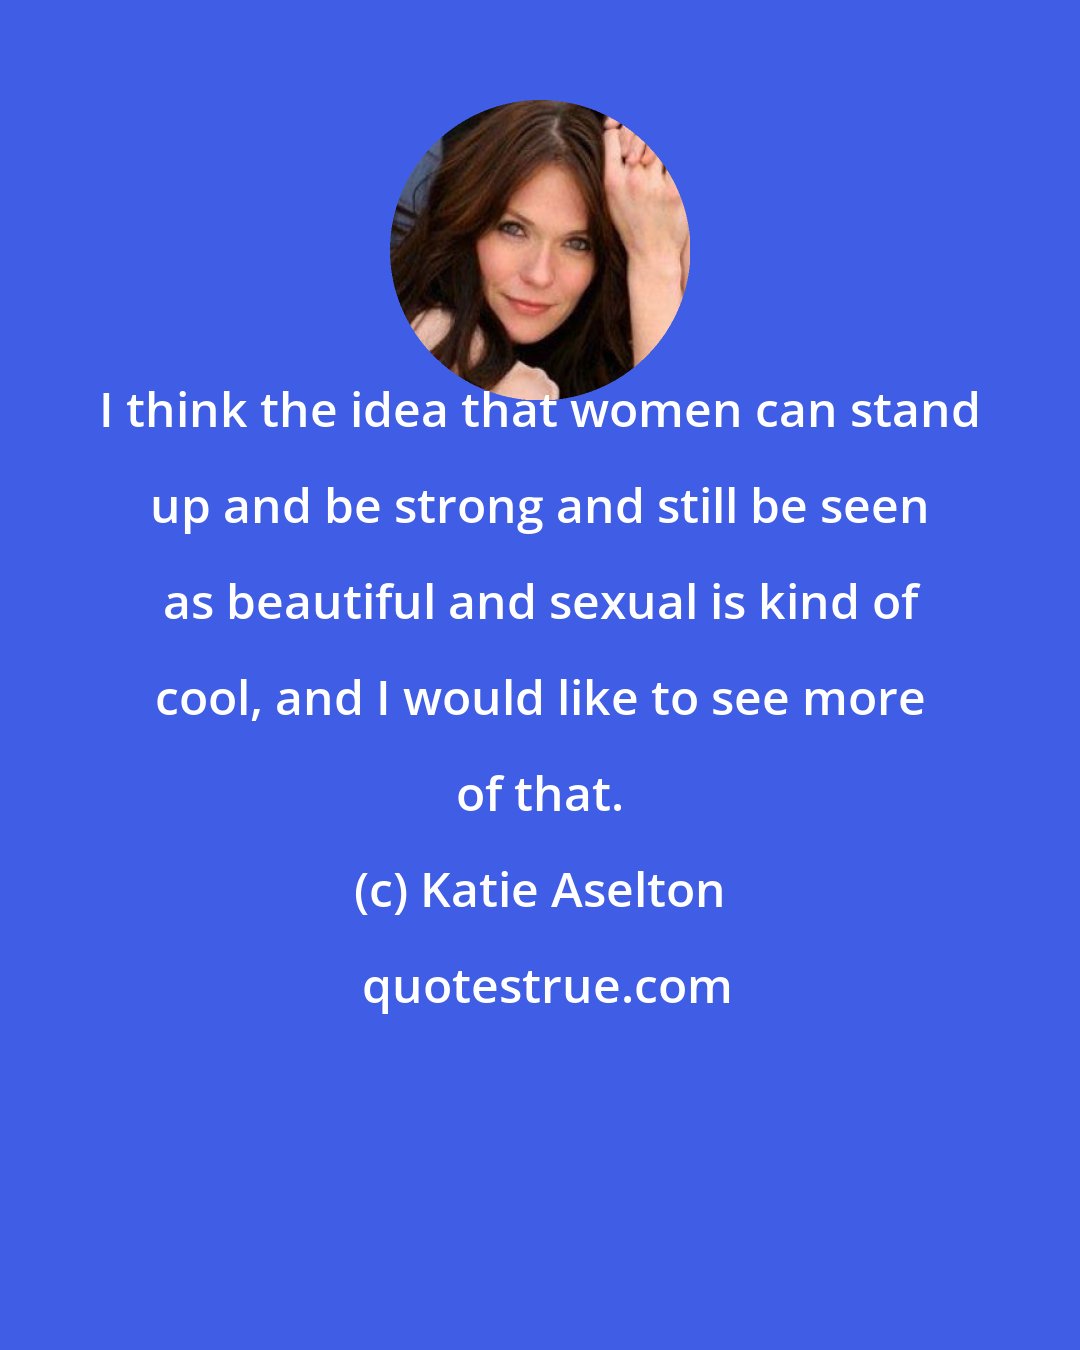 Katie Aselton: I think the idea that women can stand up and be strong and still be seen as beautiful and sexual is kind of cool, and I would like to see more of that.